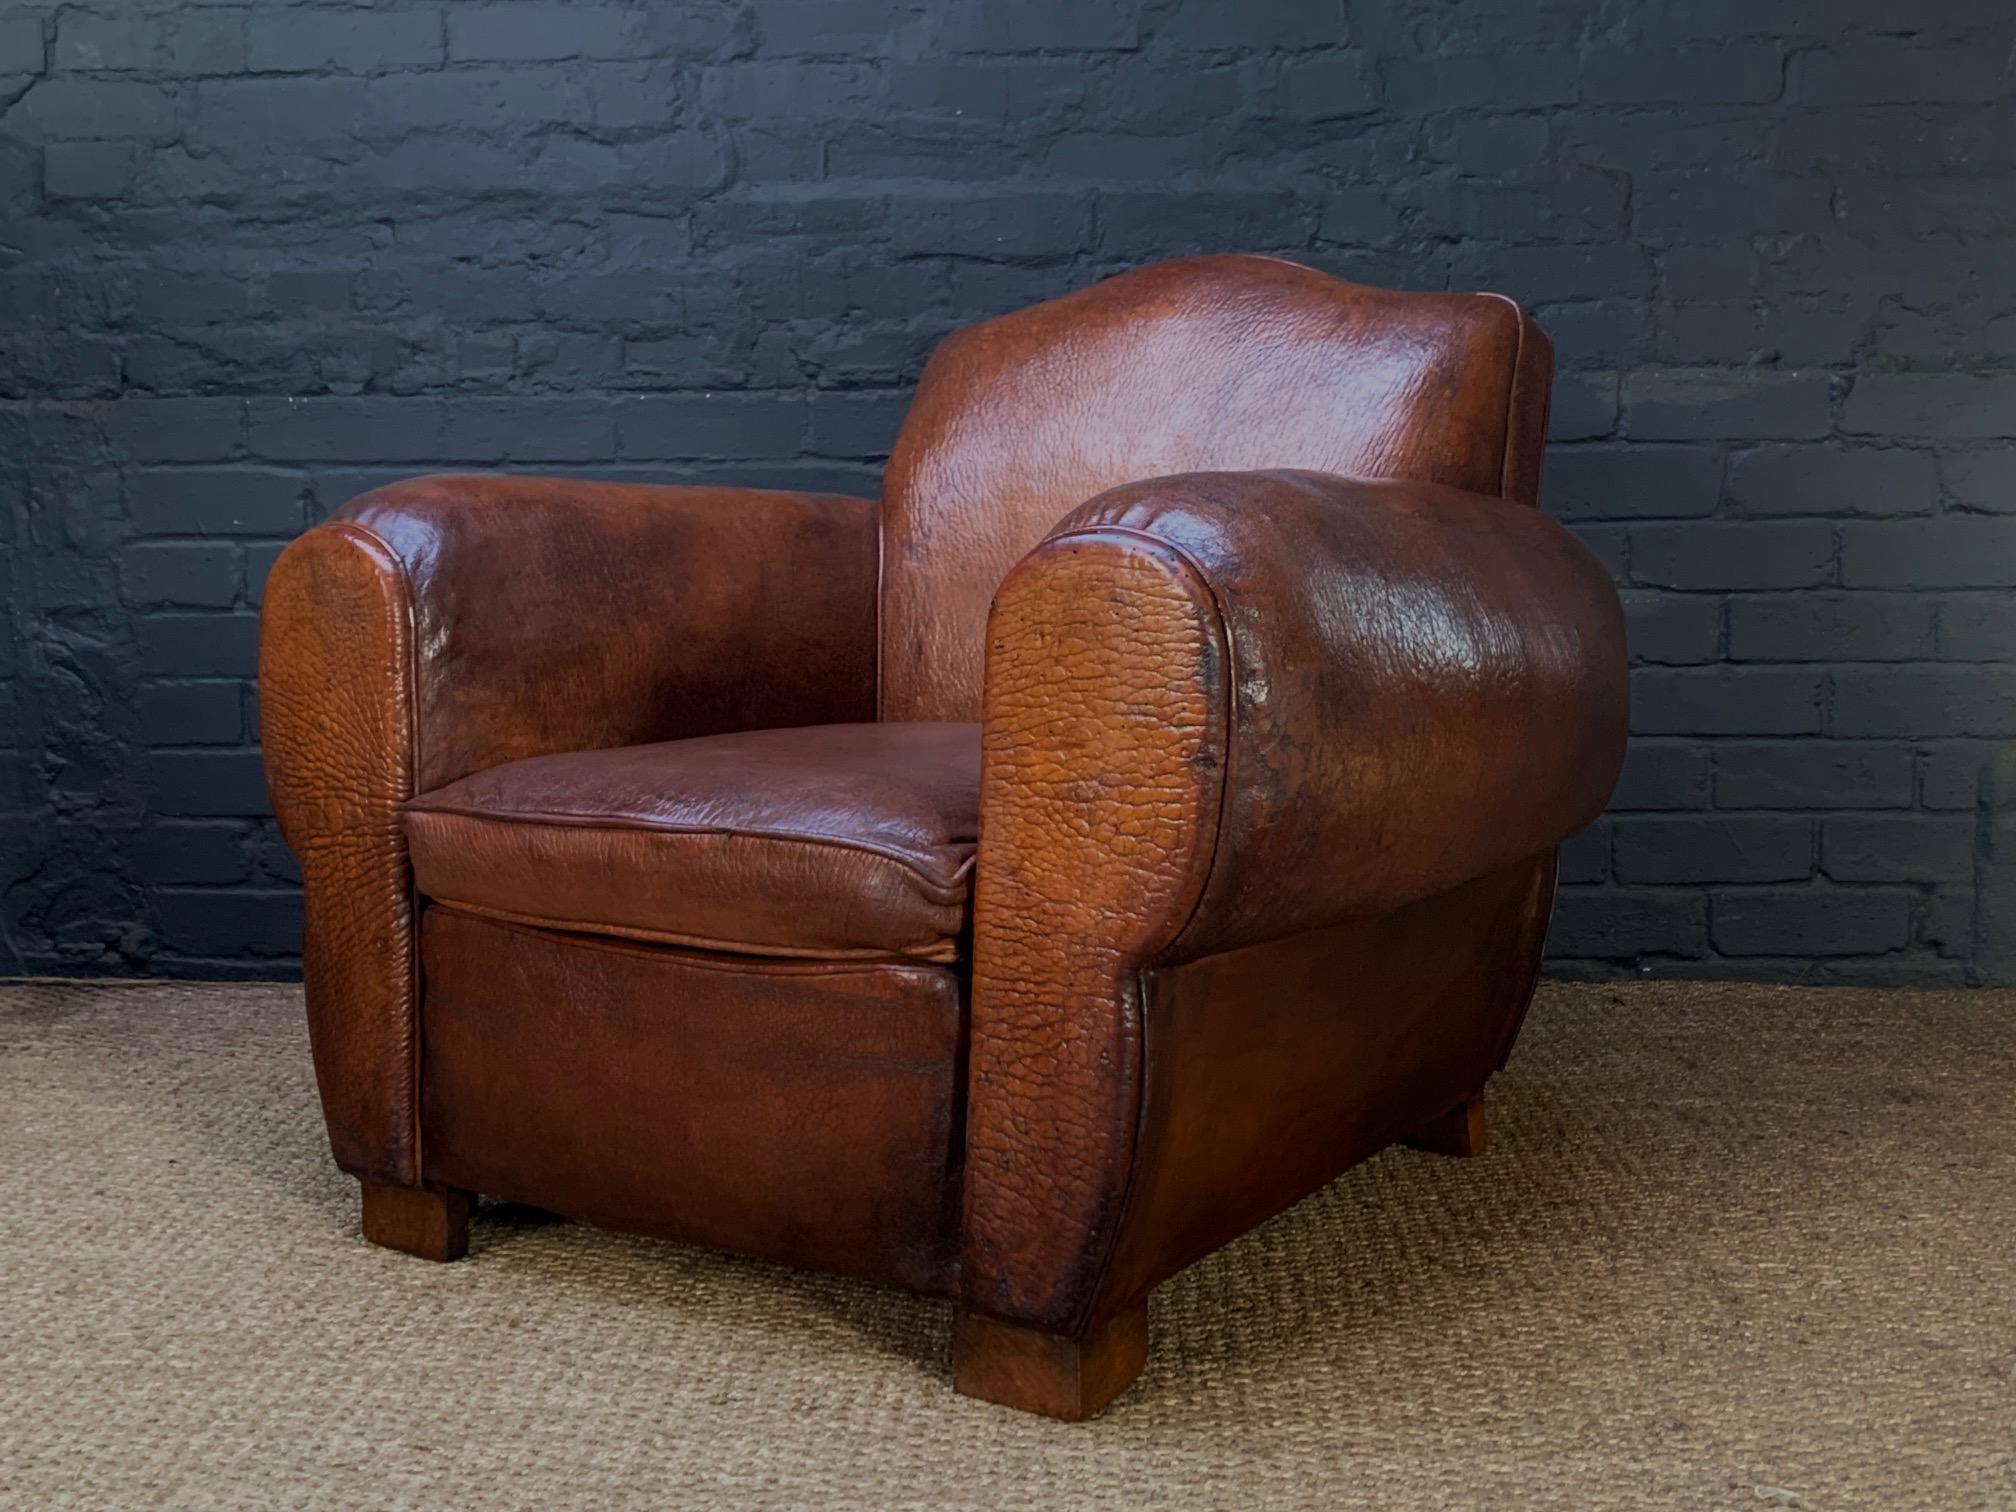 An Impressive French Leather Club Chair, Chapeau du Gendarme Model, Circa 1920's, Le Giant Model, with over-stuffed cigar arms

This impressive chair is one of the first French leather club chairs to be made in this form. Giant models are of the